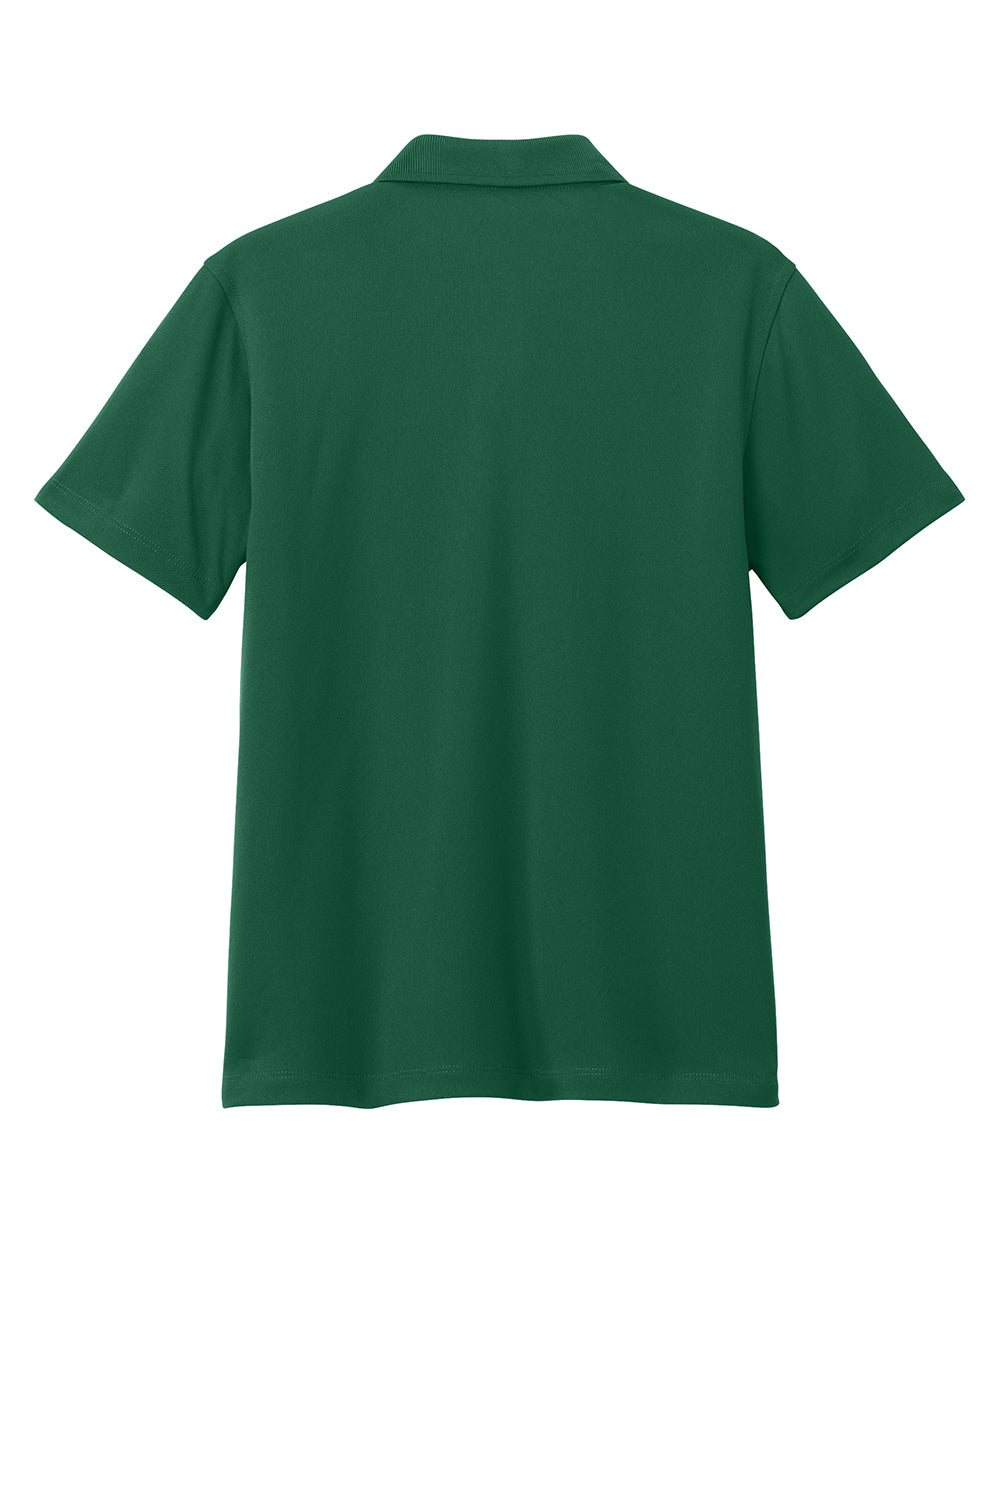 Port Authority Y110 Youth Dry Zone Moisture Wicking Short Sleeve Polo Shirt Deep Forest Green Flat Back